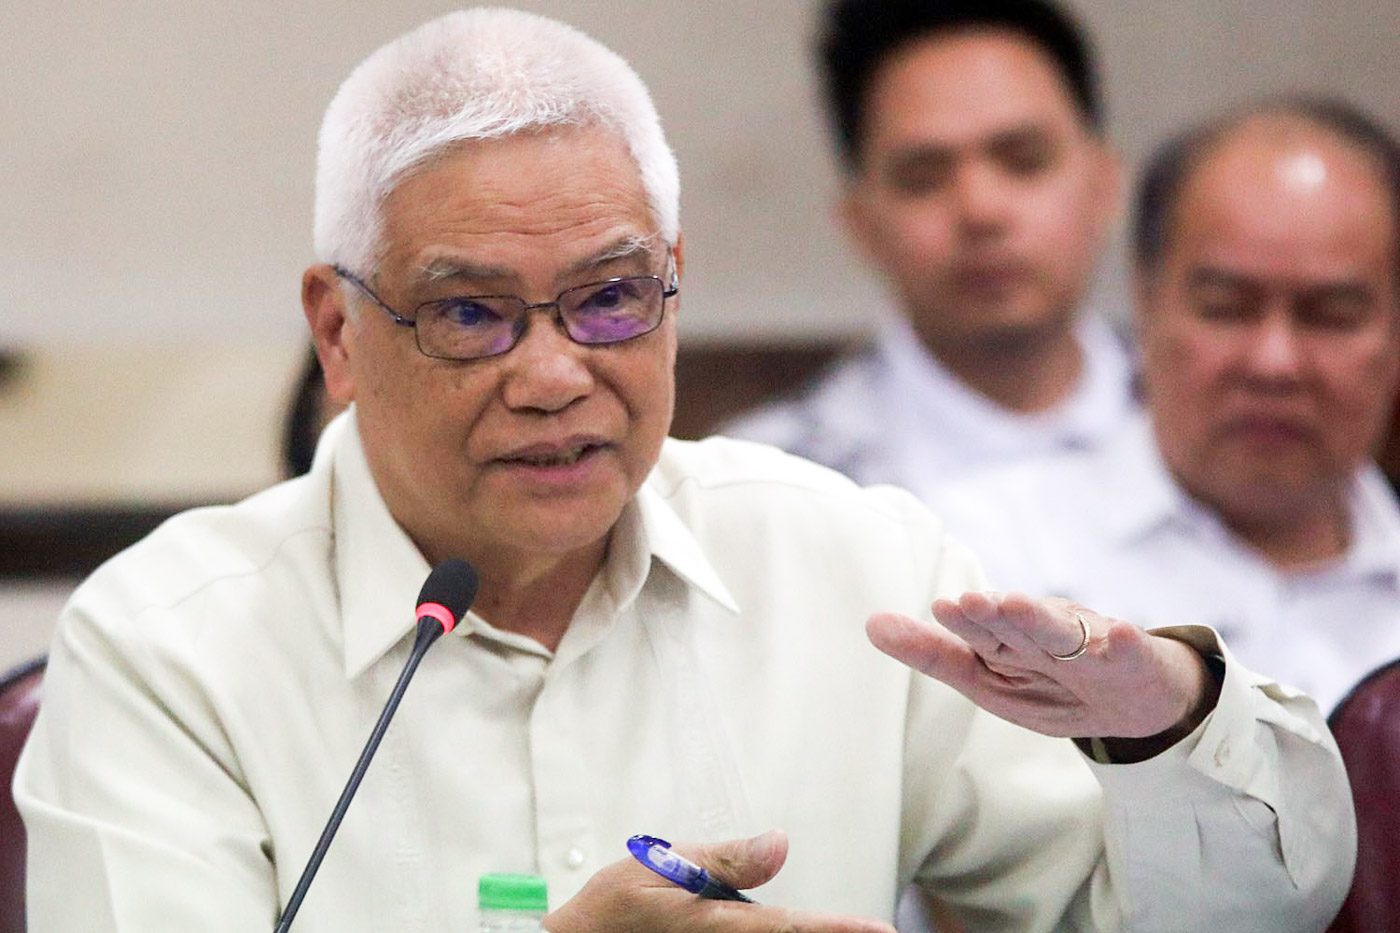 Mislatel rollout may be pushed back to after elections – DICT